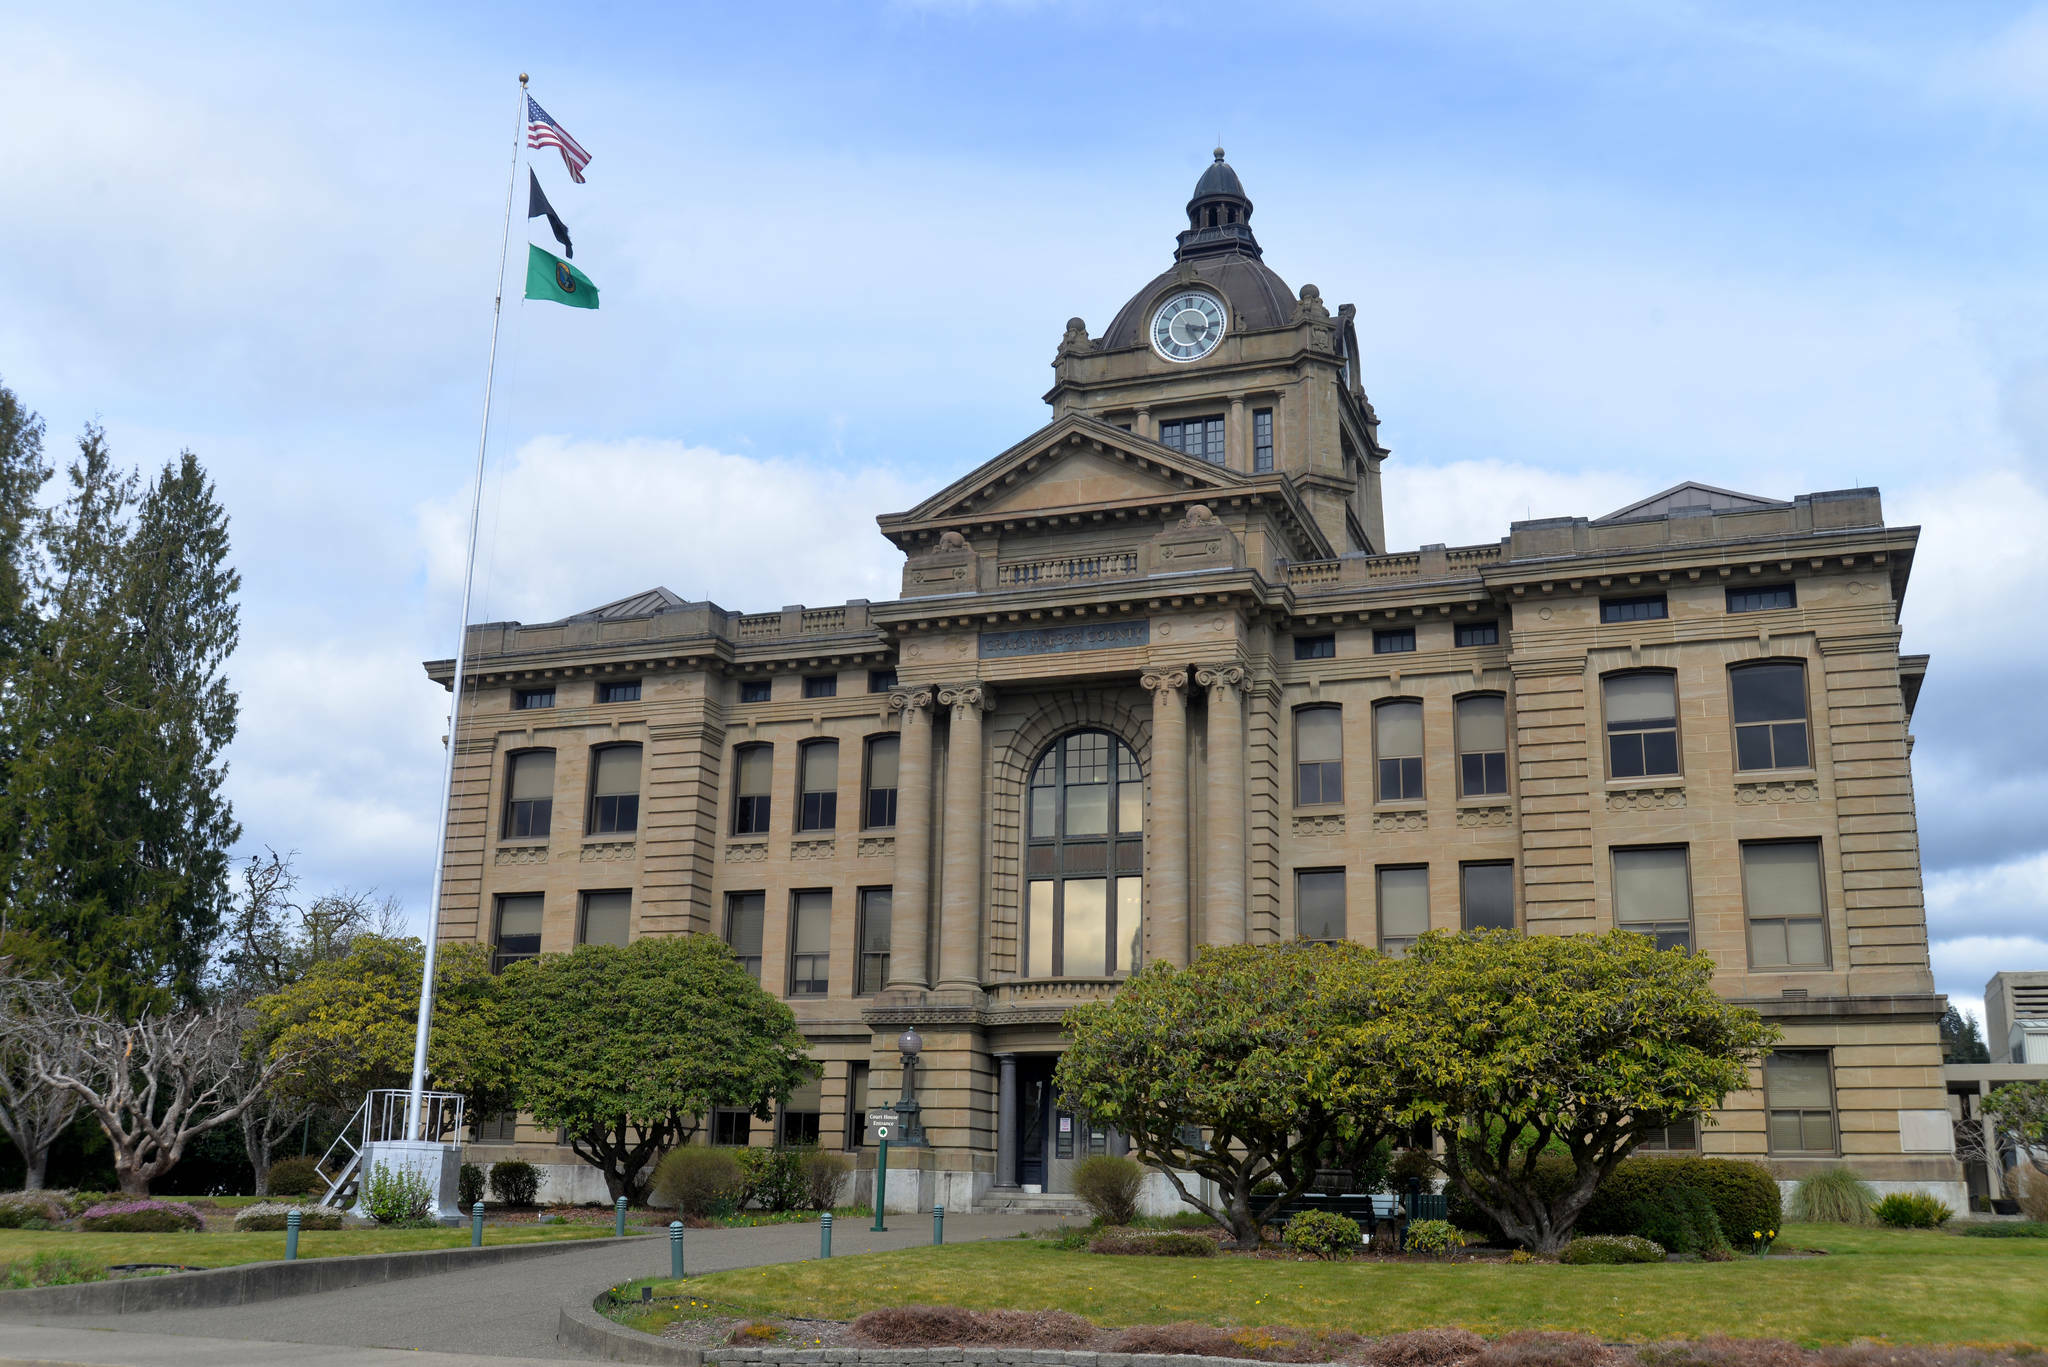 An Aberdeen man was sentenced at Grays Harbor County Courthouse last week for drug offenses to nine years in prison. (Michael S. Lockett / The Daily World file)